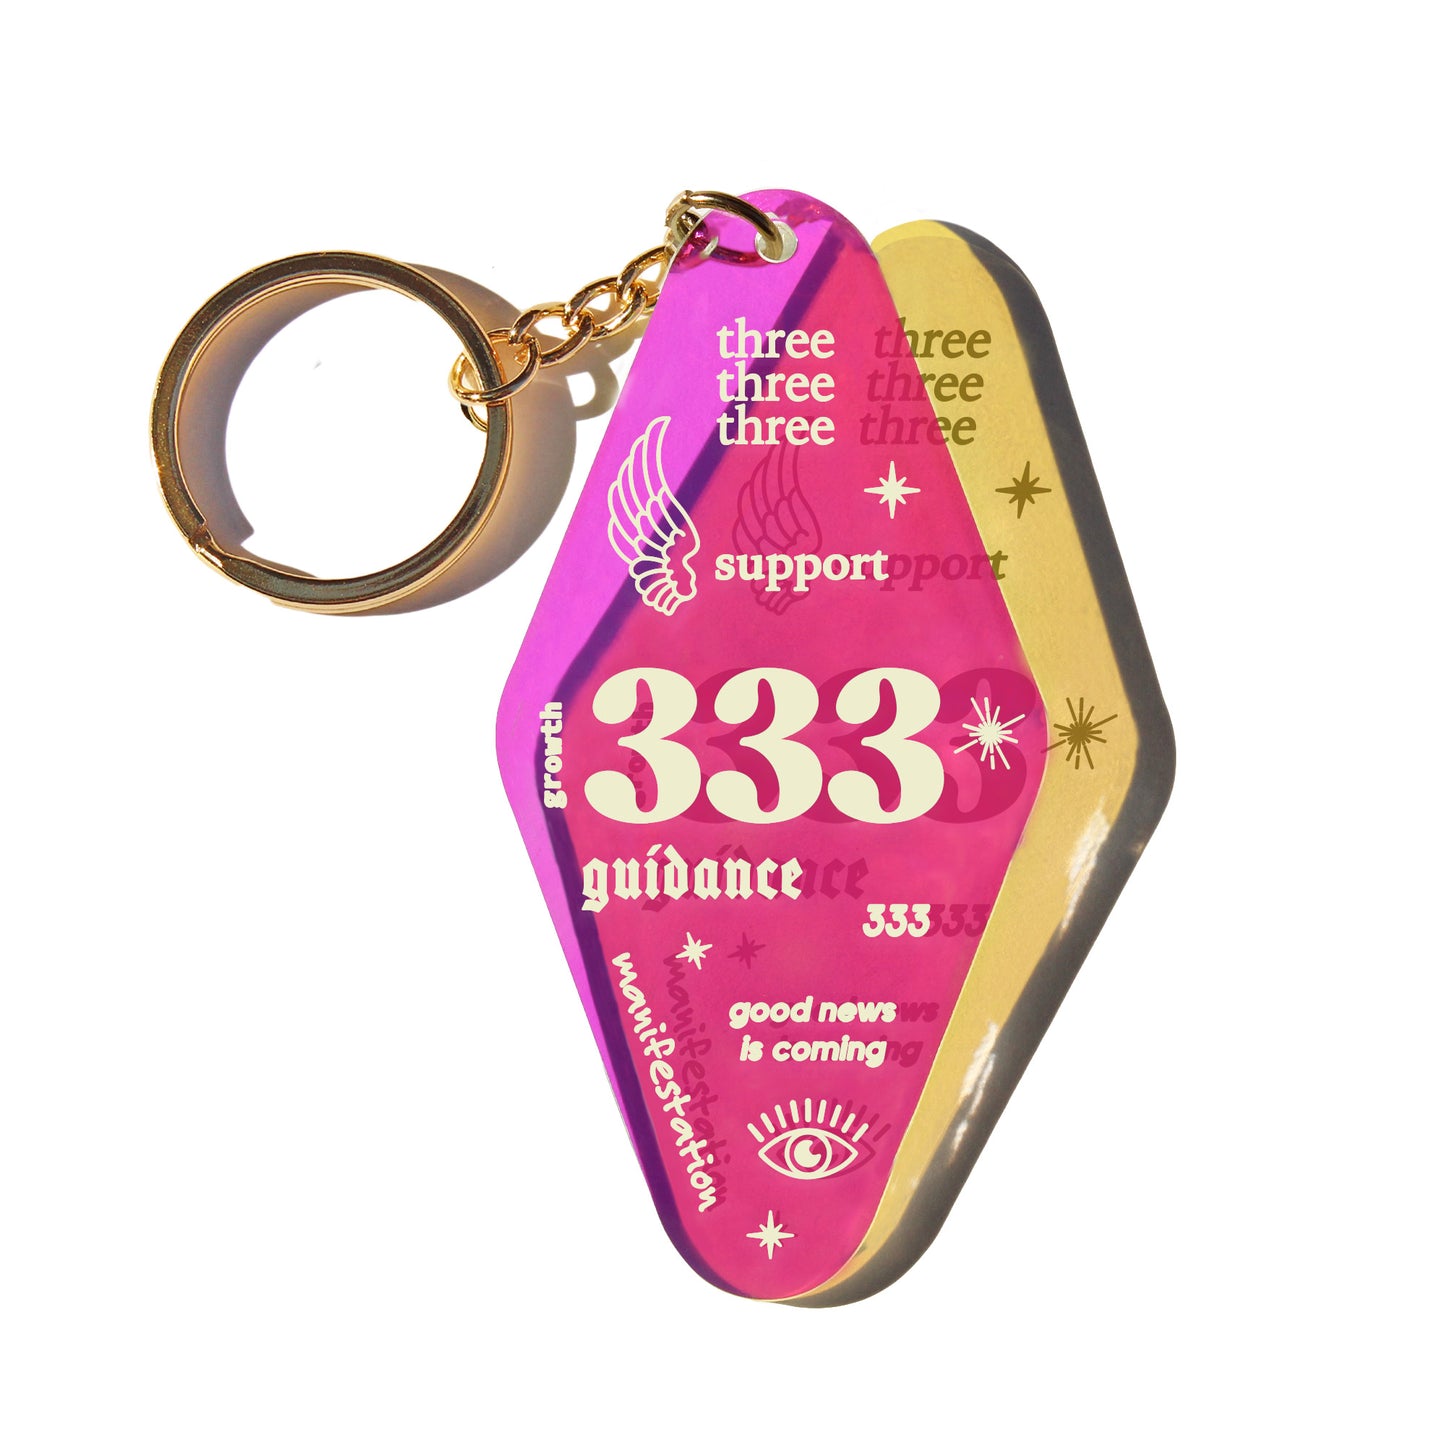 333 angel number, 333 keychain, 333 meaning 